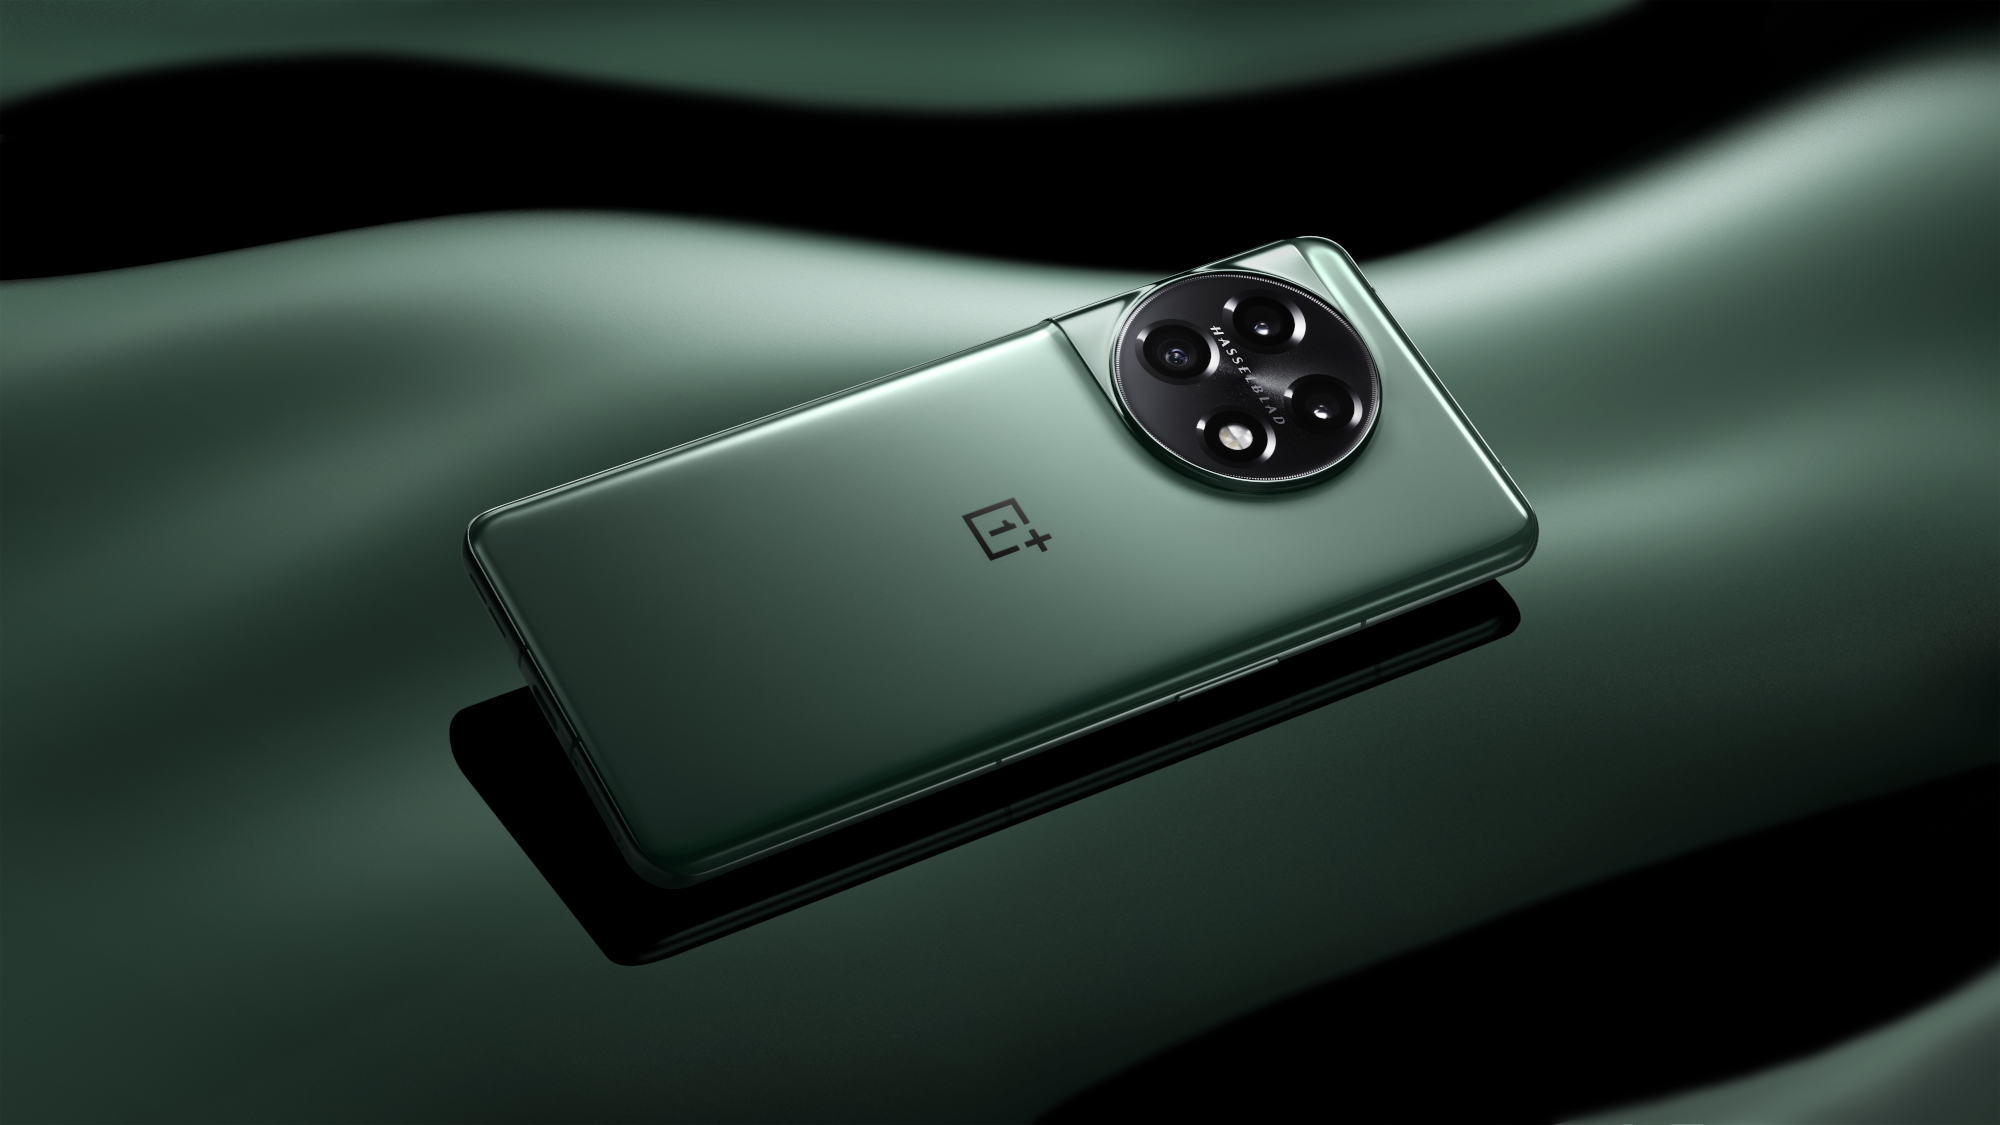 OnePlus 11 Concept: first photos and videos of the LED smartphone